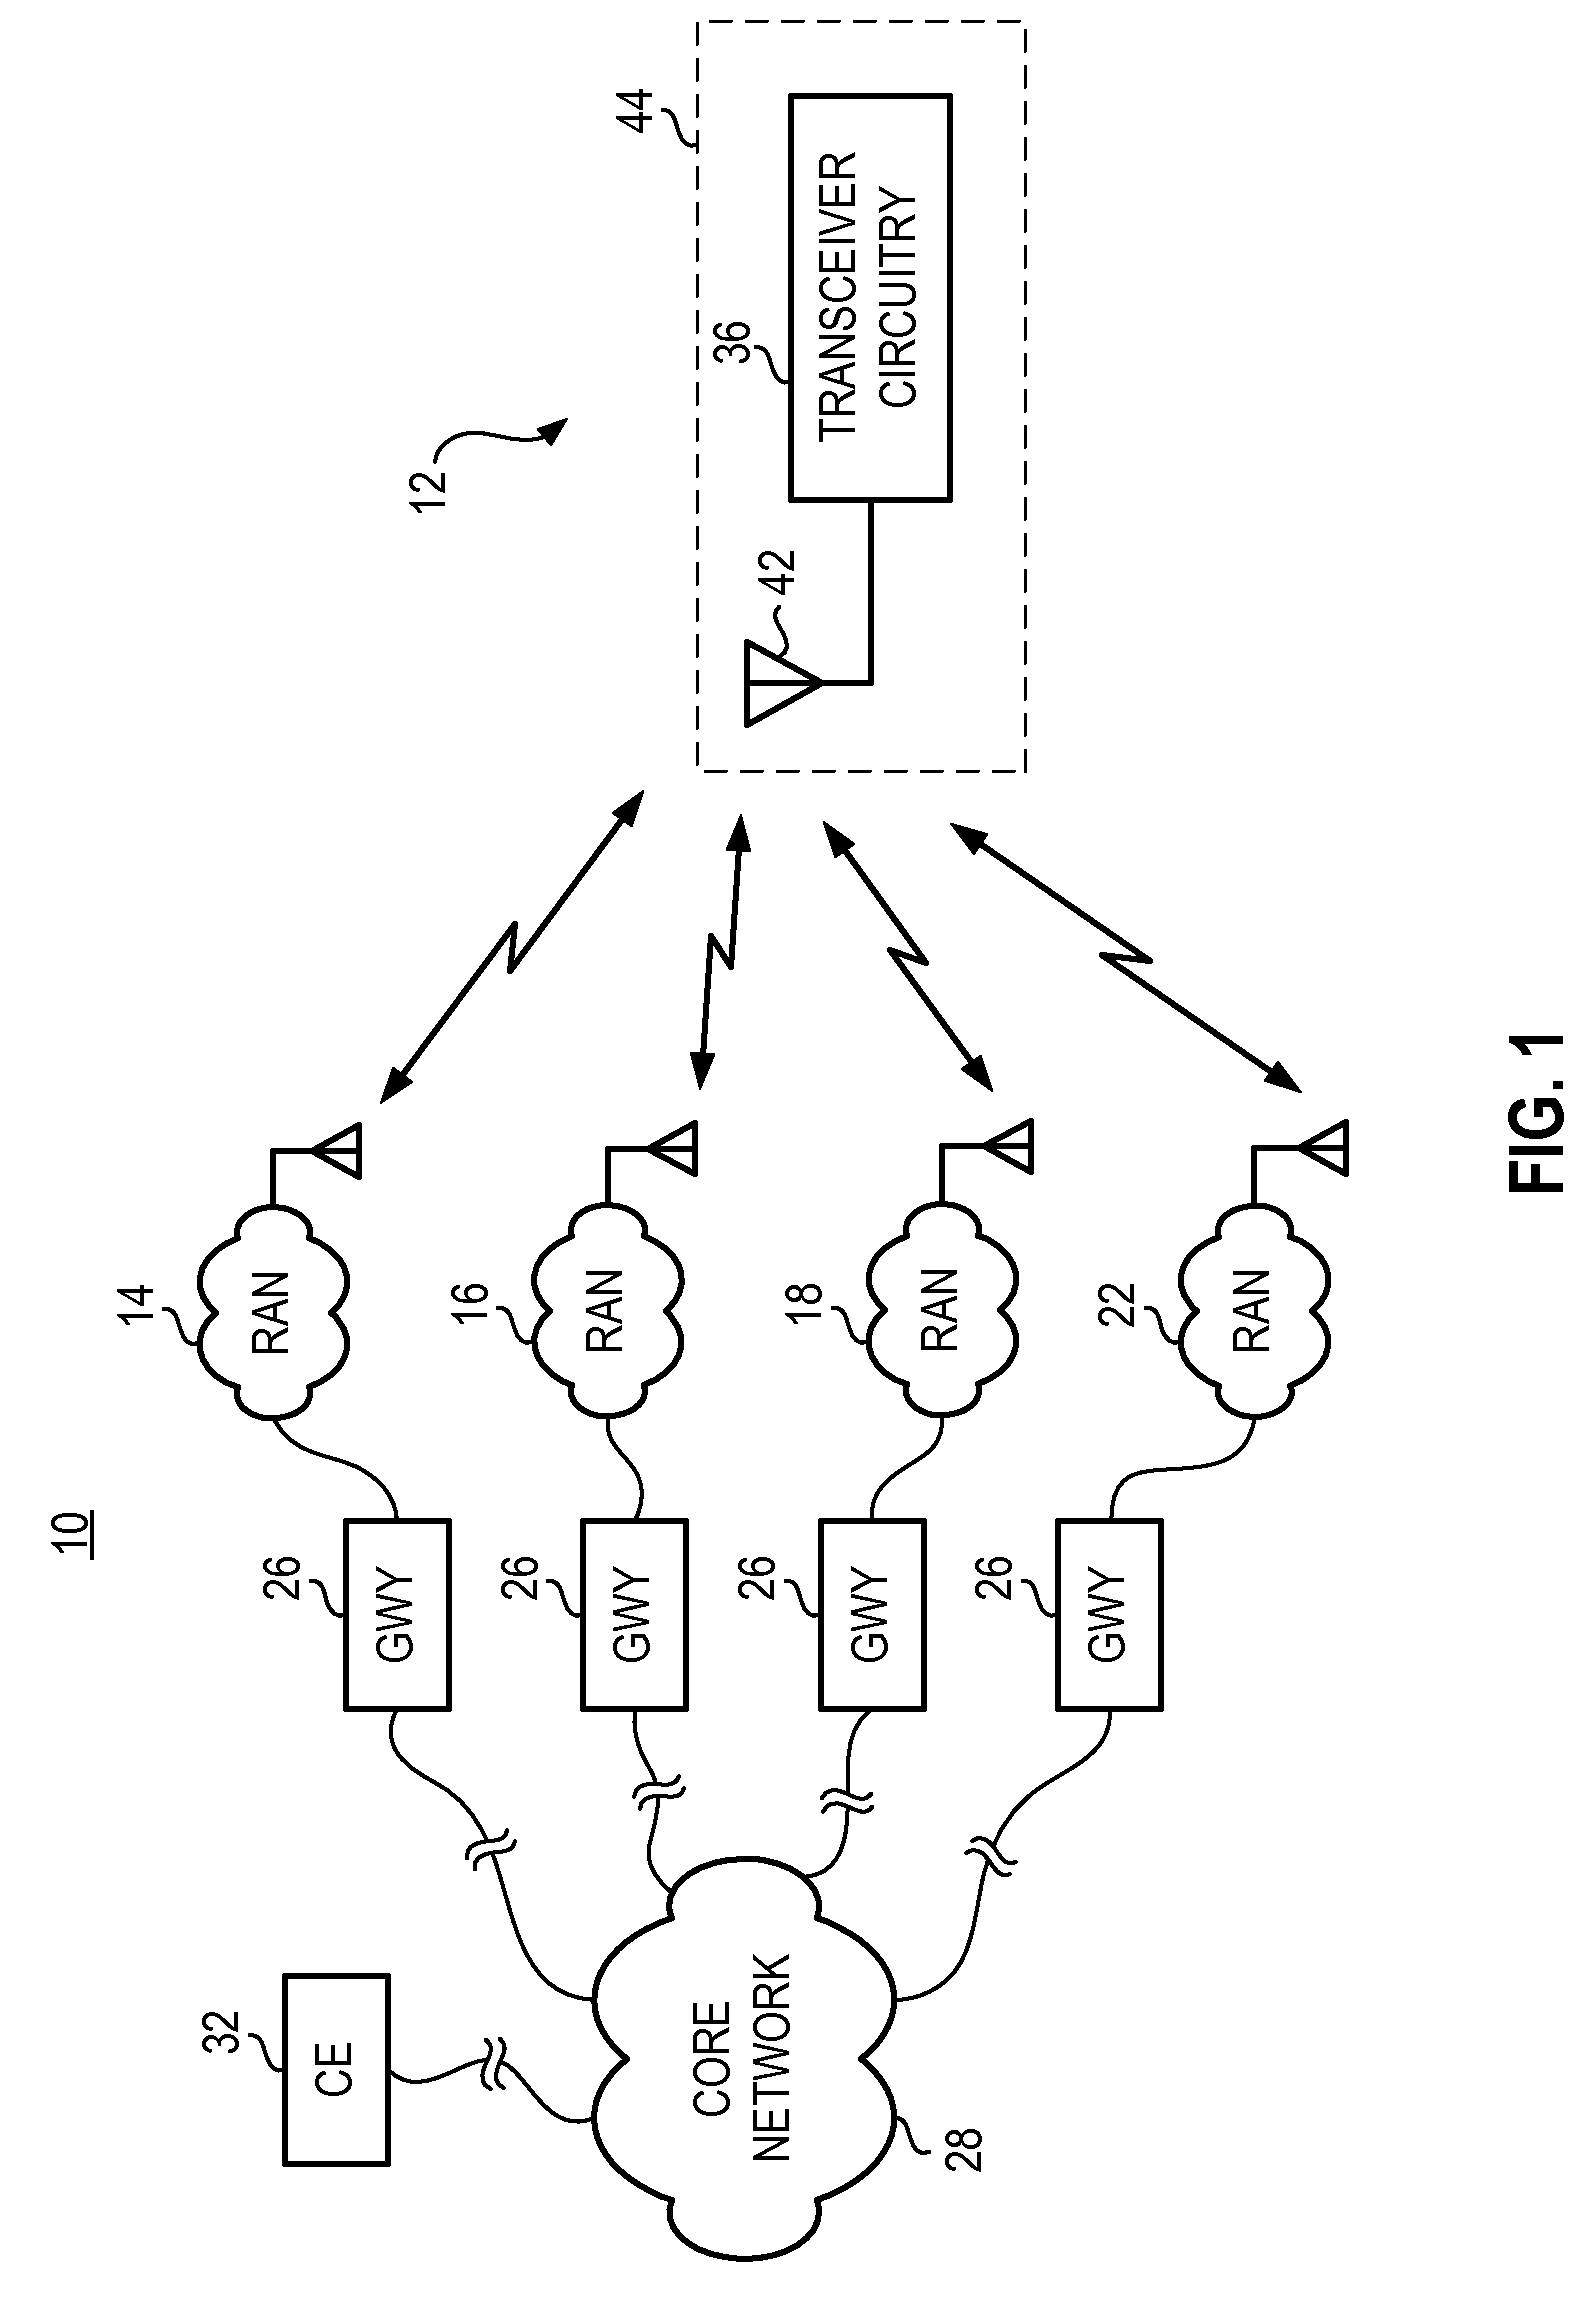 Antenna apparatus, and associated methodology, for a multi-band radio device